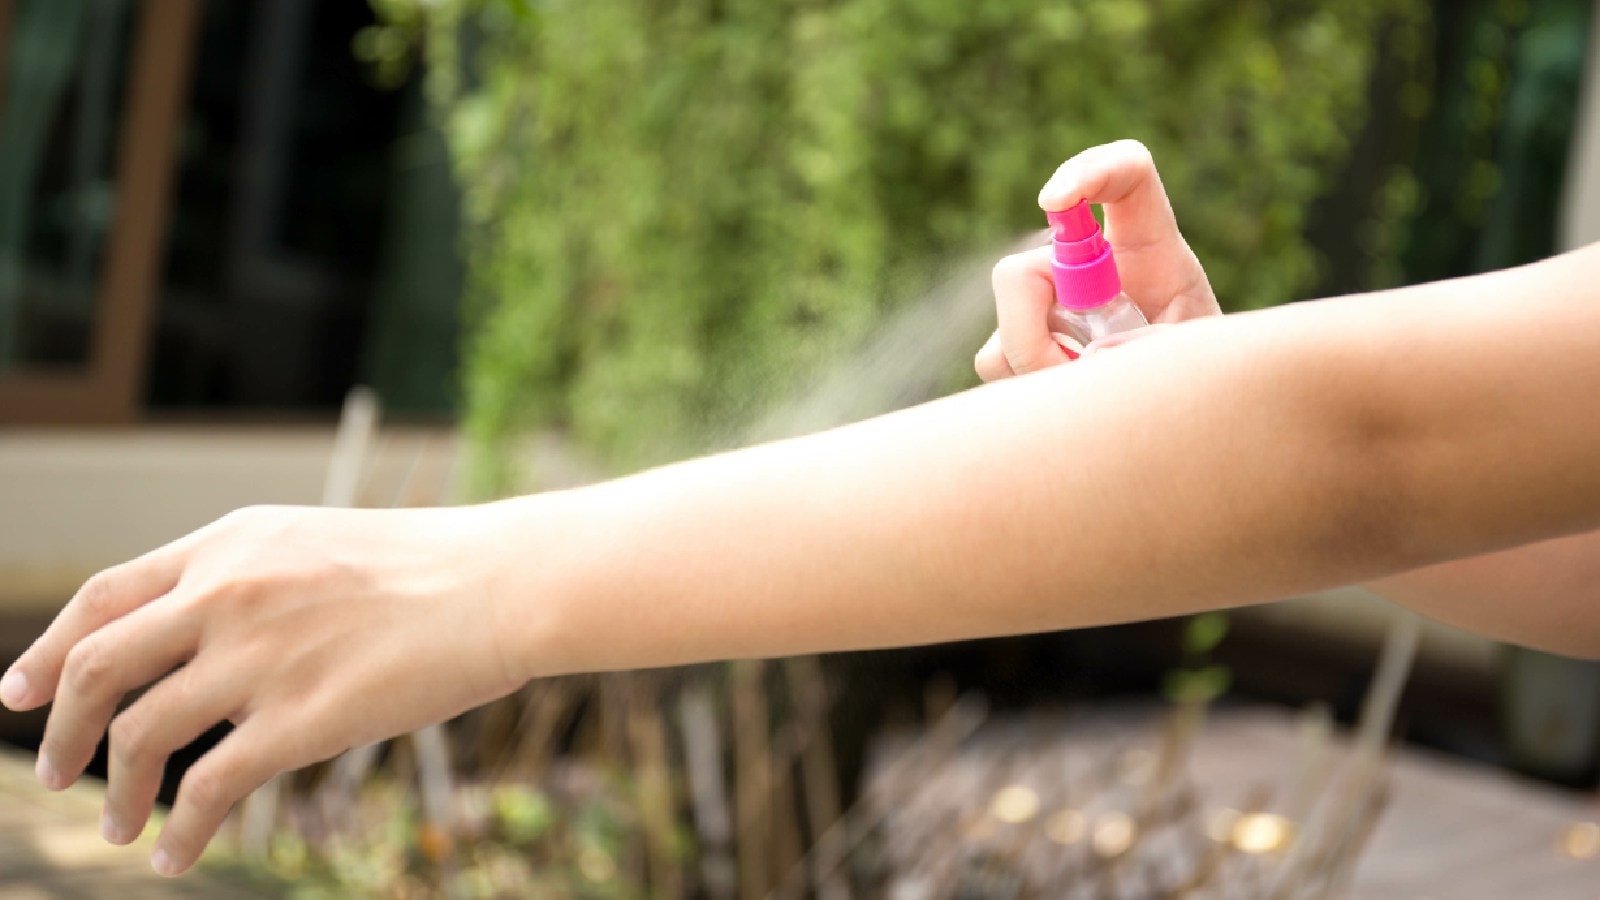 5 best mosquito repellent sprays to protect yourself